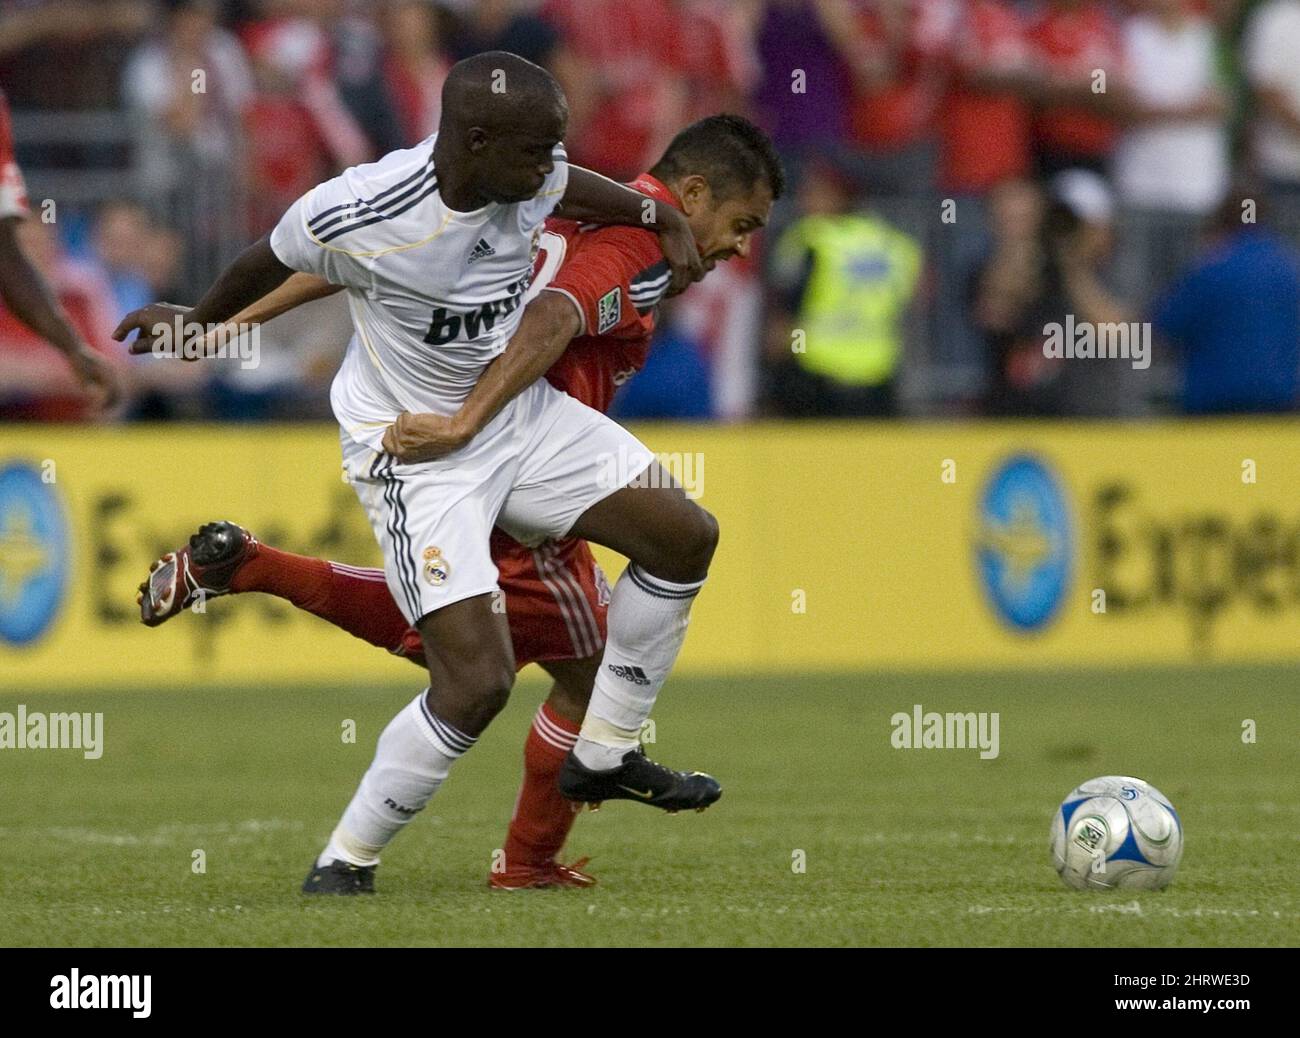 Real Madrid's Lassana Diarra, right, challenges Toronto FC's Amado Guevara during the first half of a friendly soccer match in Toronto on Friday, Aug. 7, 2009. (AP Photo/The Canadian Press, Chris Young) Stock Photo